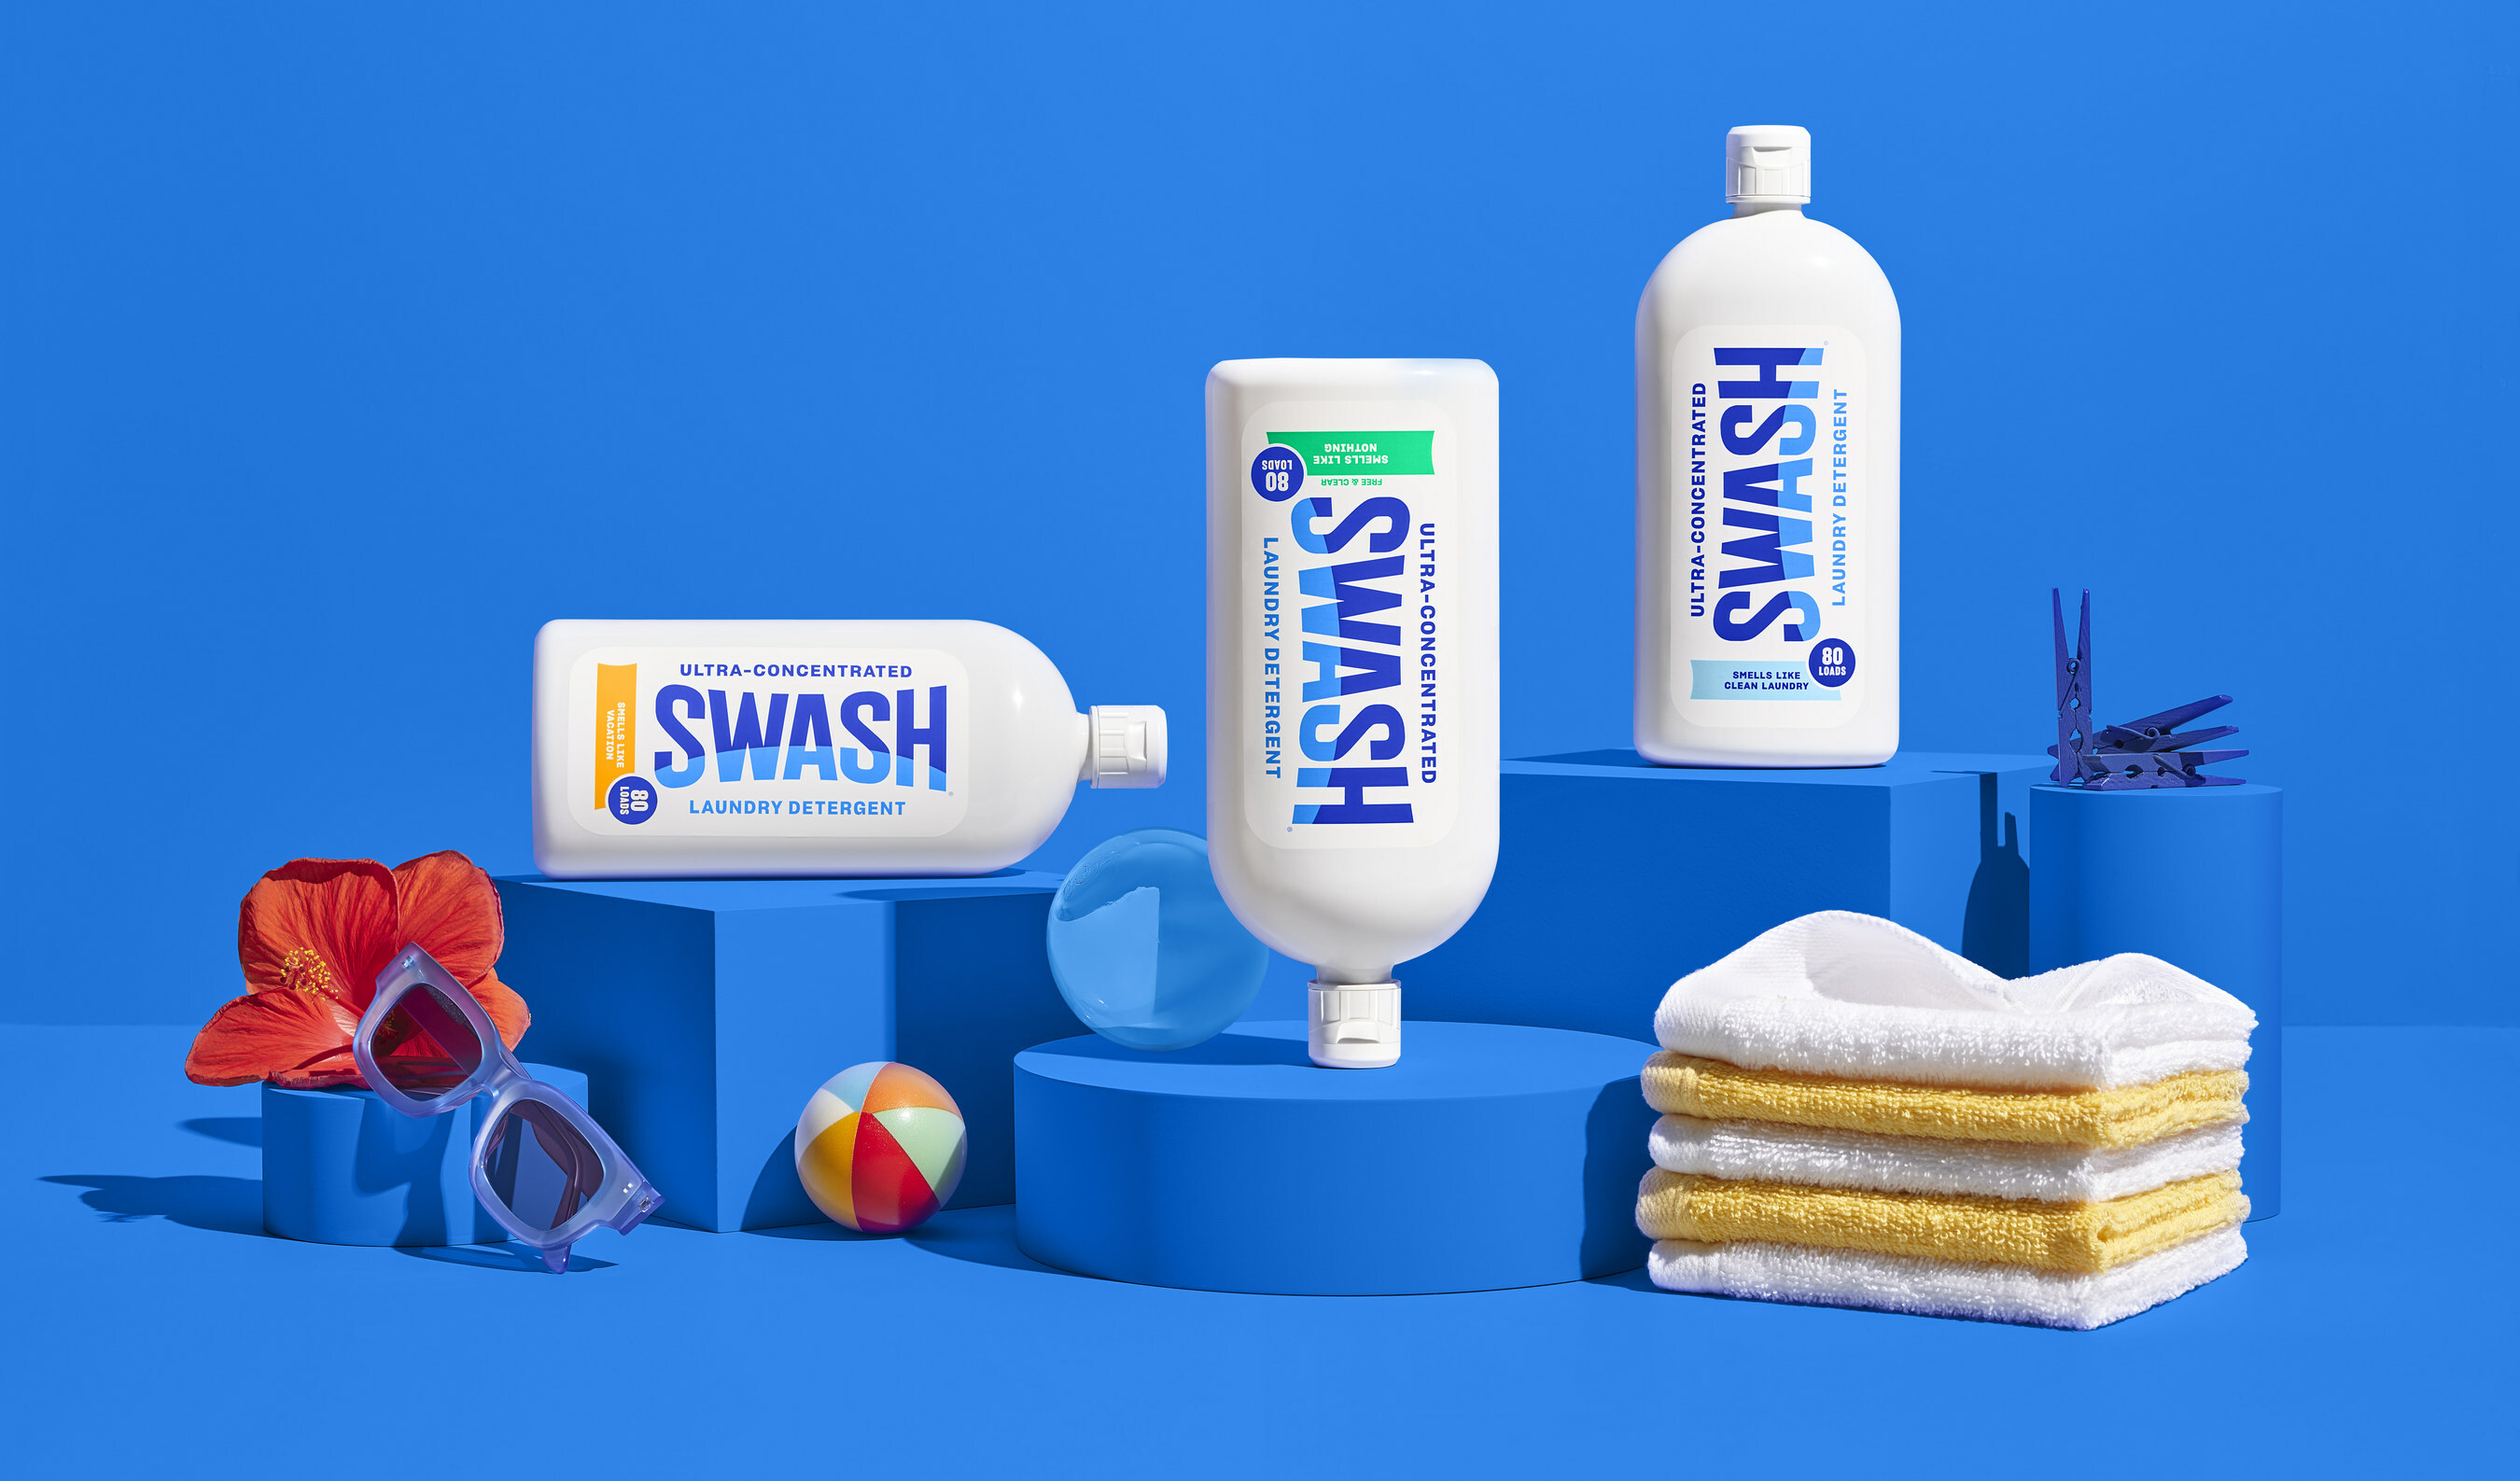 The newly rebranded Swash® Laundry Detergent is available in three scents that just make sense: Smells Like Clean Laundry, Smells Like Nothing, and Smells Like Vacation.